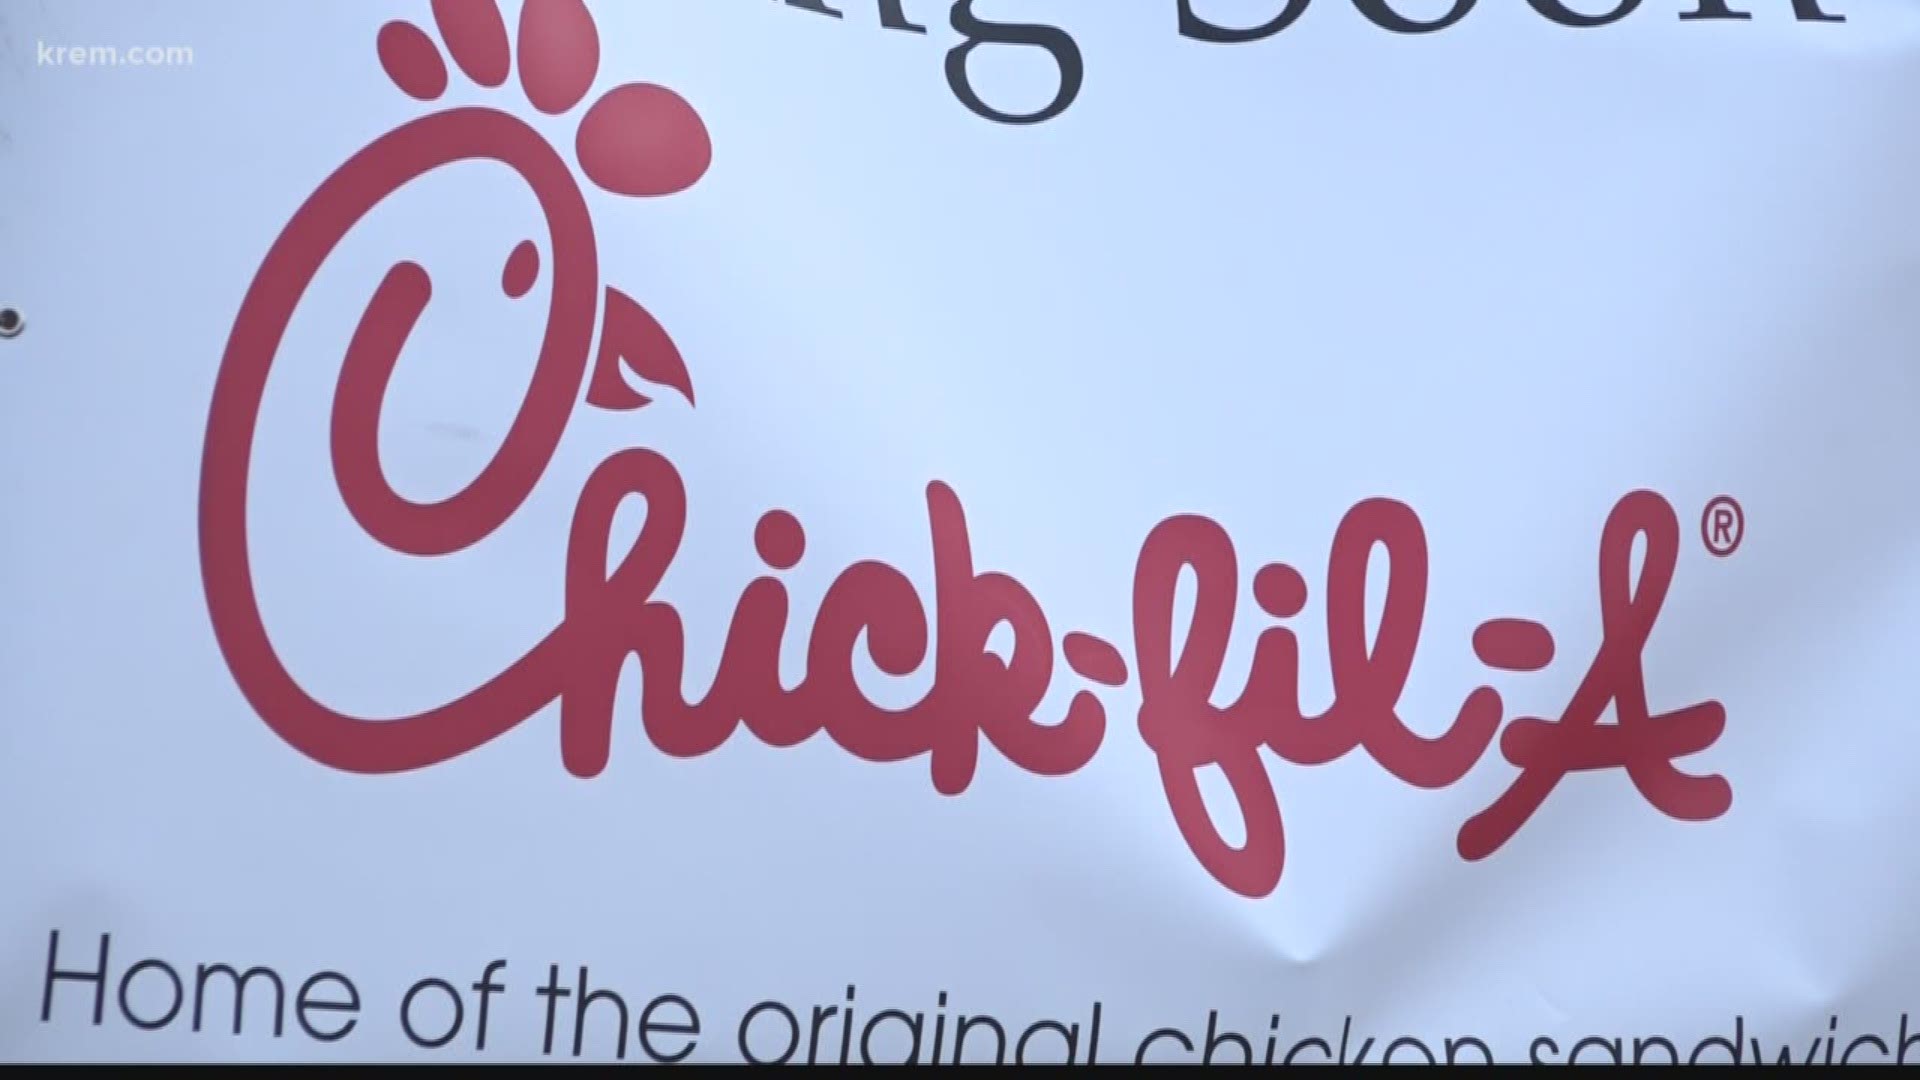 Chick-fil-A might be coming to our neck of the woods. A sign on Government Way reads, "Coming soon," with the Chick-fil-A logo underneath.